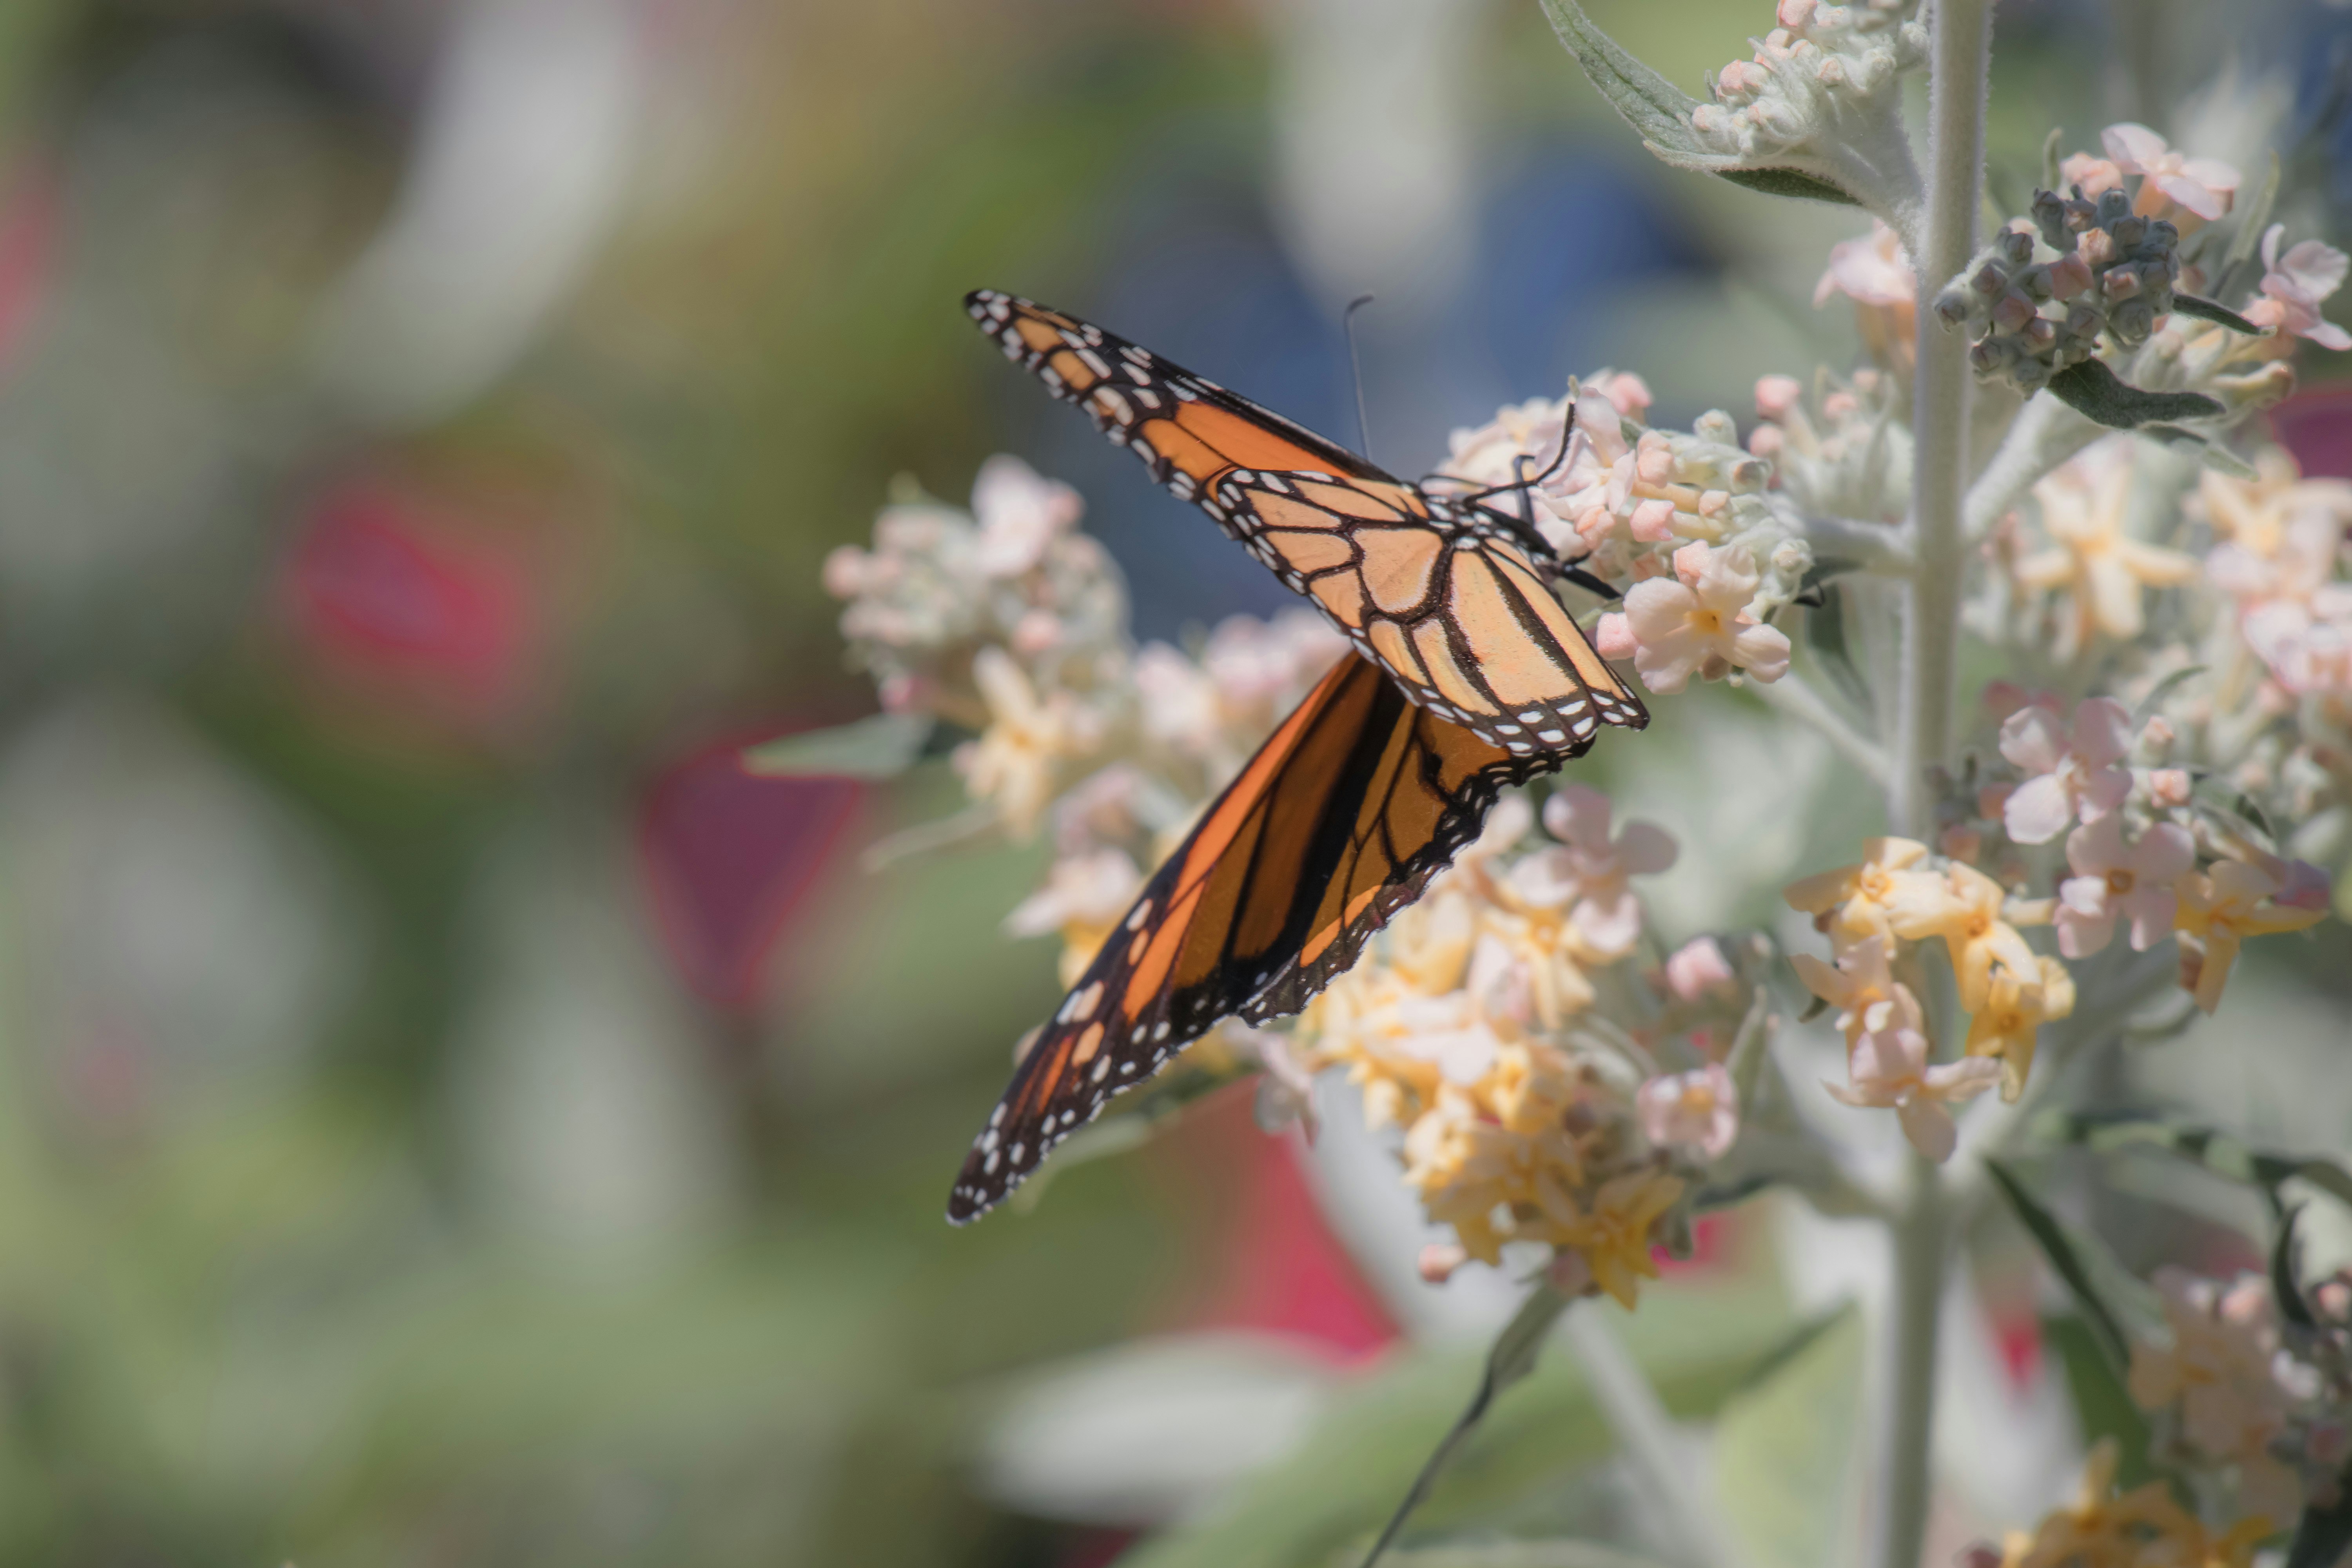 monarch butterfly perched on white and pink flower in close up photography during daytime